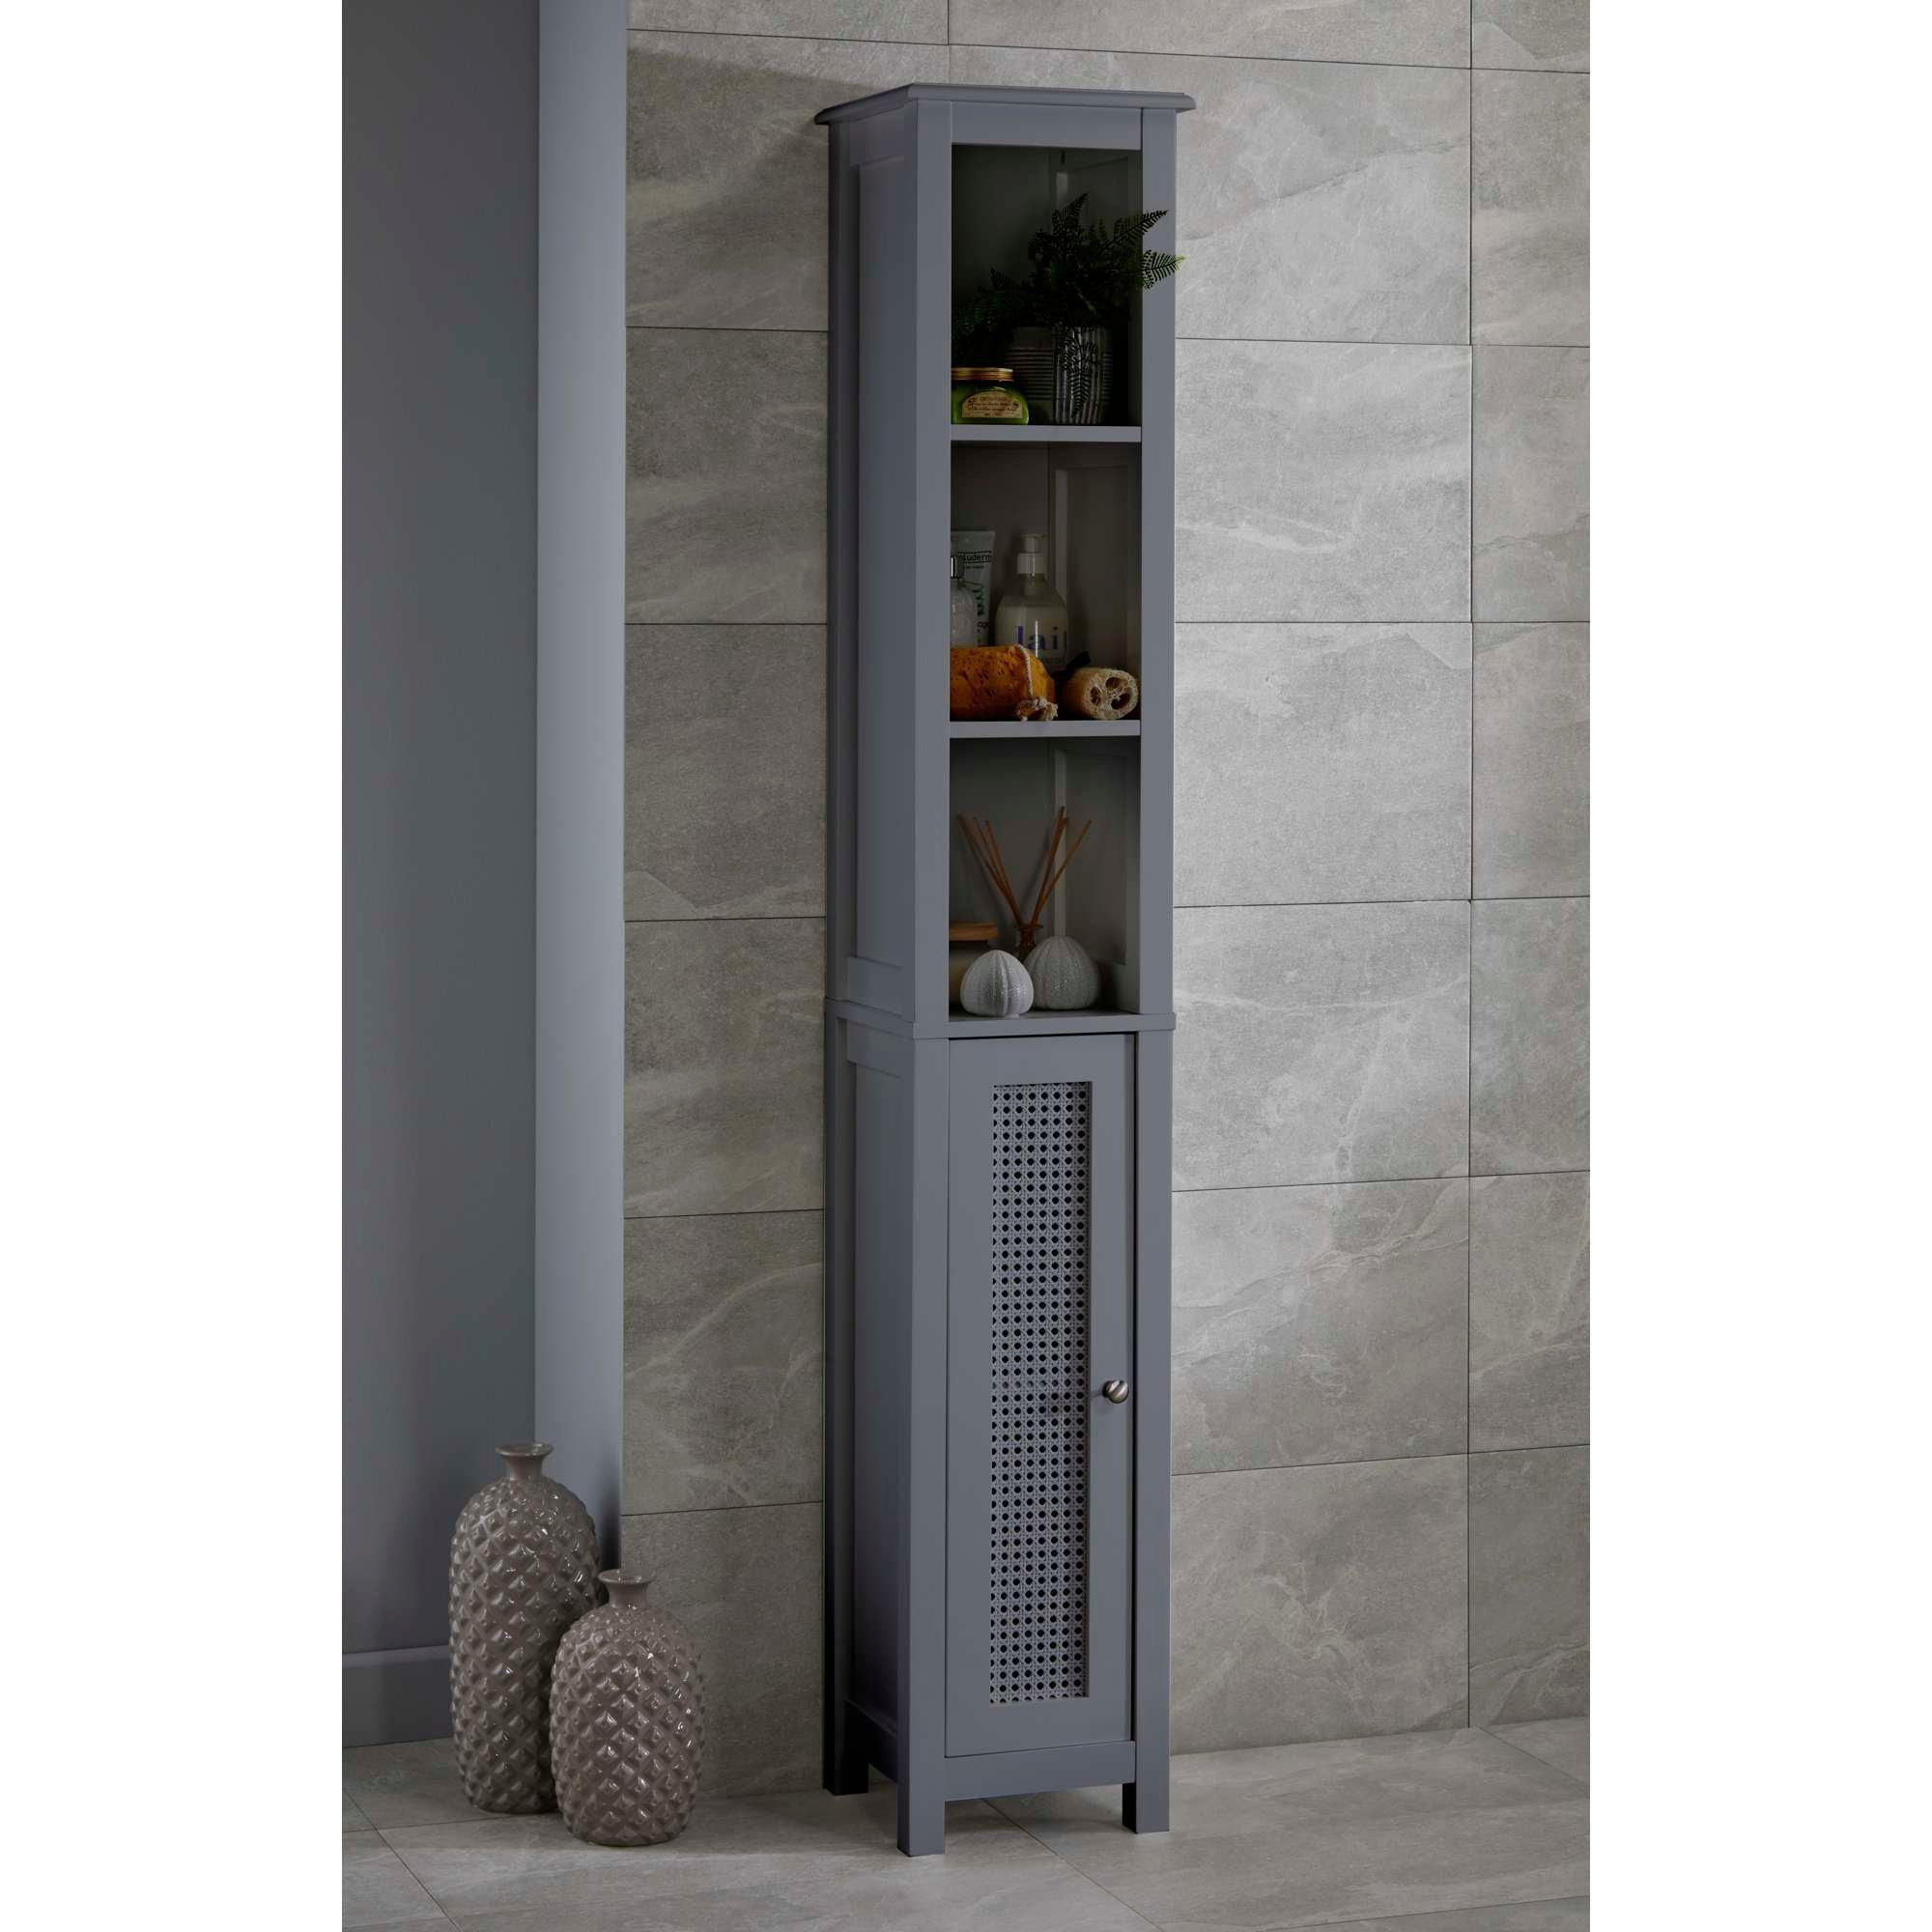 Retford Tallboy Bathroom Storage Cabinet with Fixed Shelves and Door - image 1